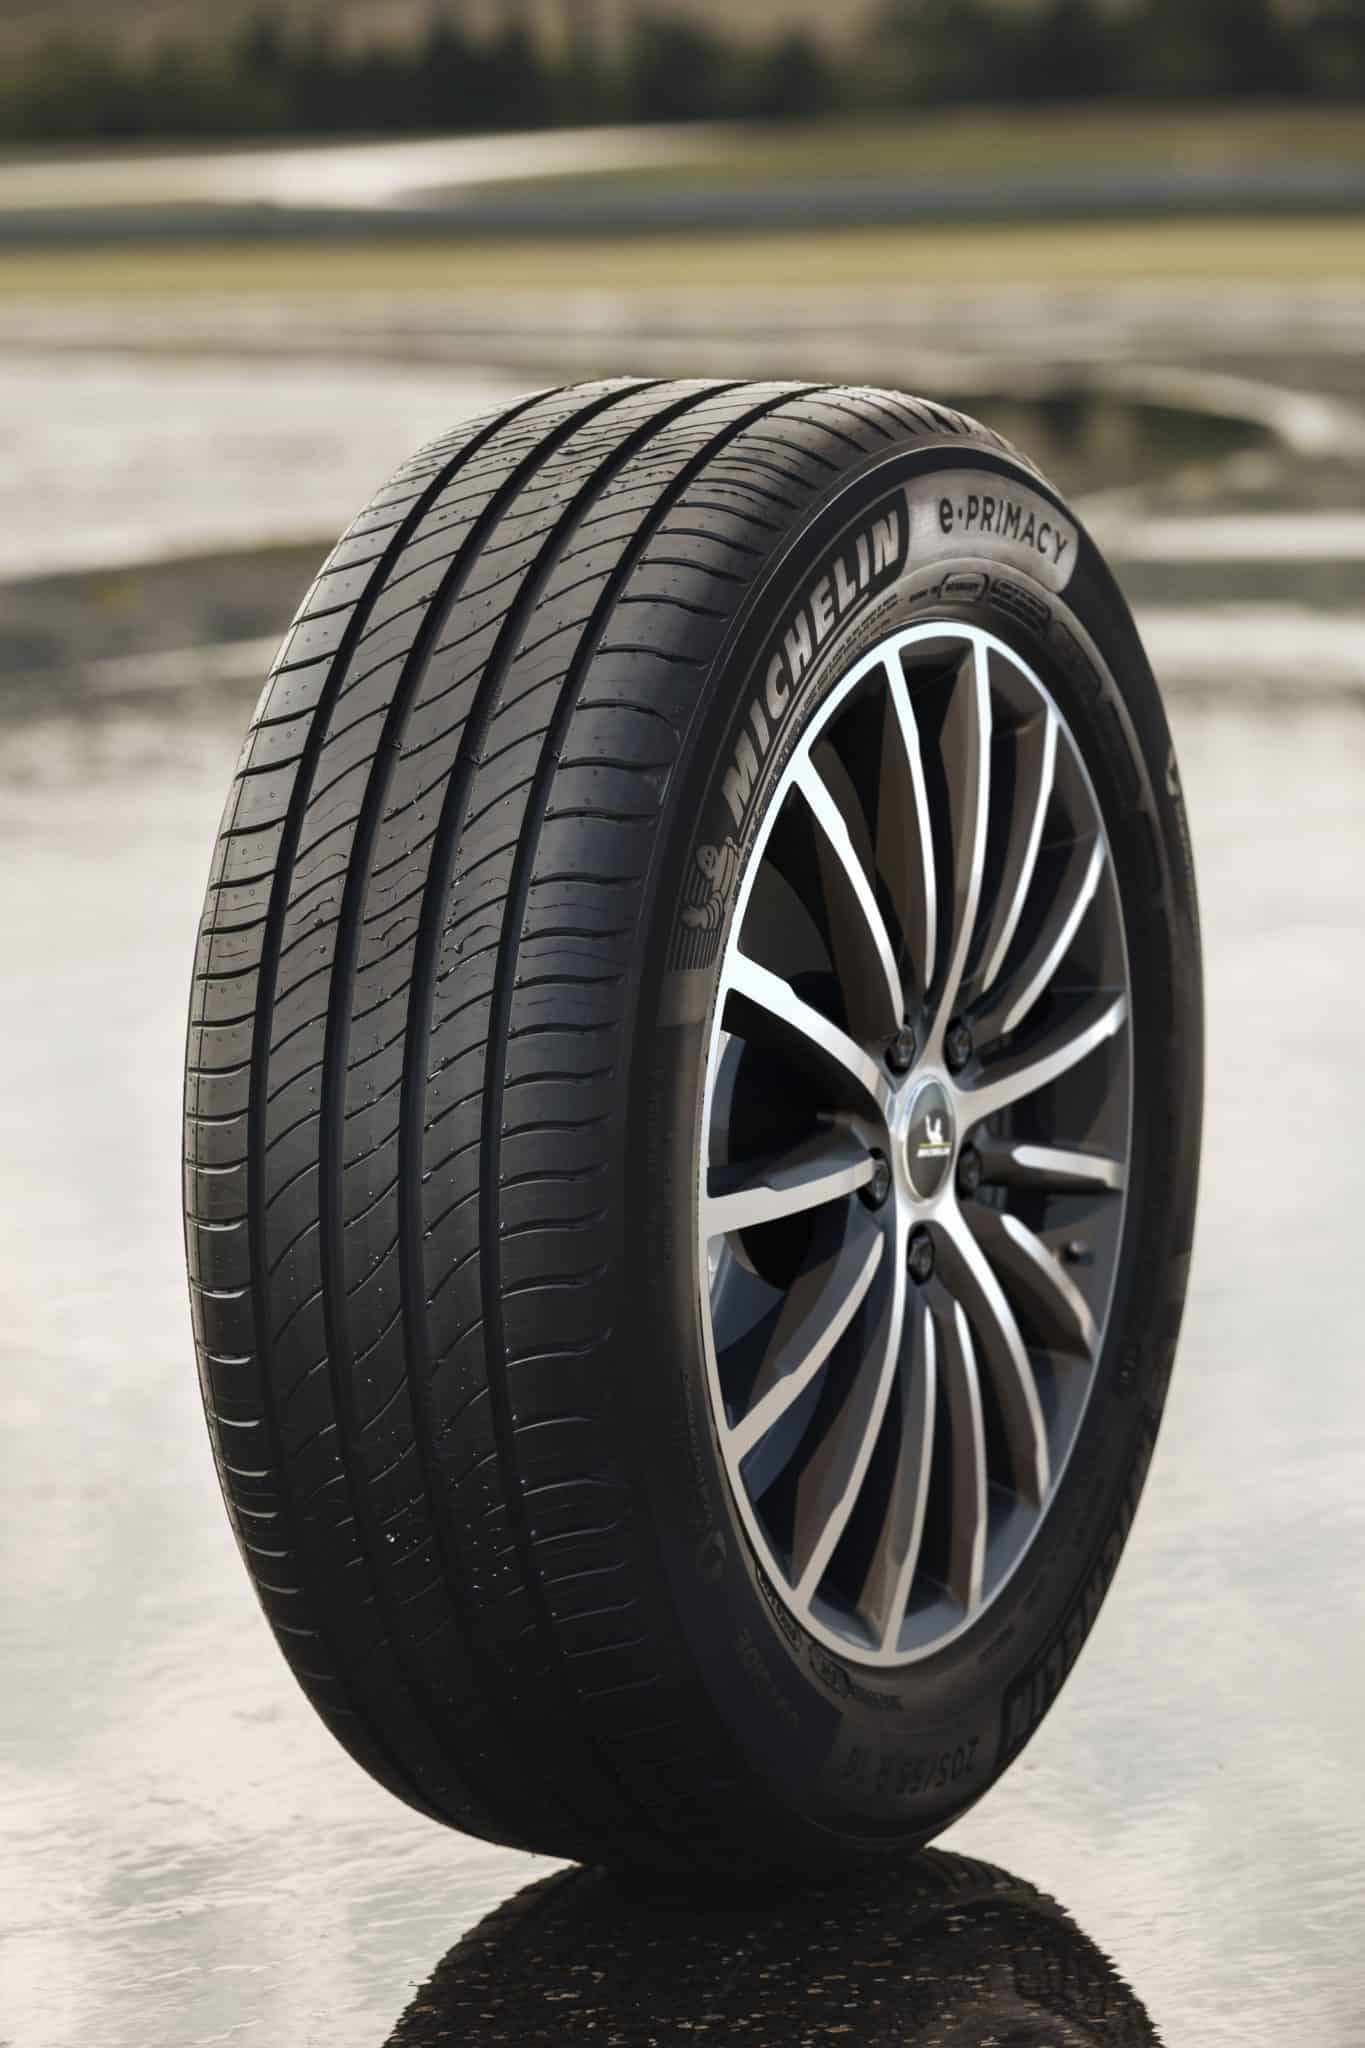 MICHELIN UNVEILS NEW ‘ECO RESPONSIBLE’ e.PRIMACY TYRE ON SALE HERE FROM